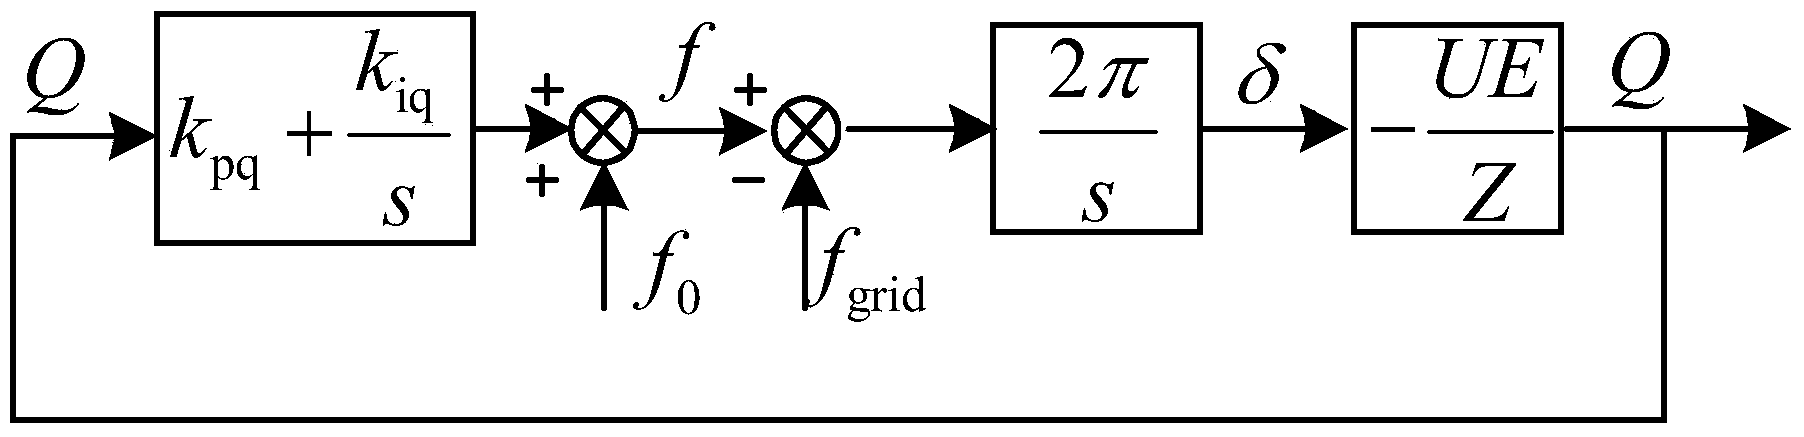 Voltage type control method for novel photovoltaic grid-connected inverter